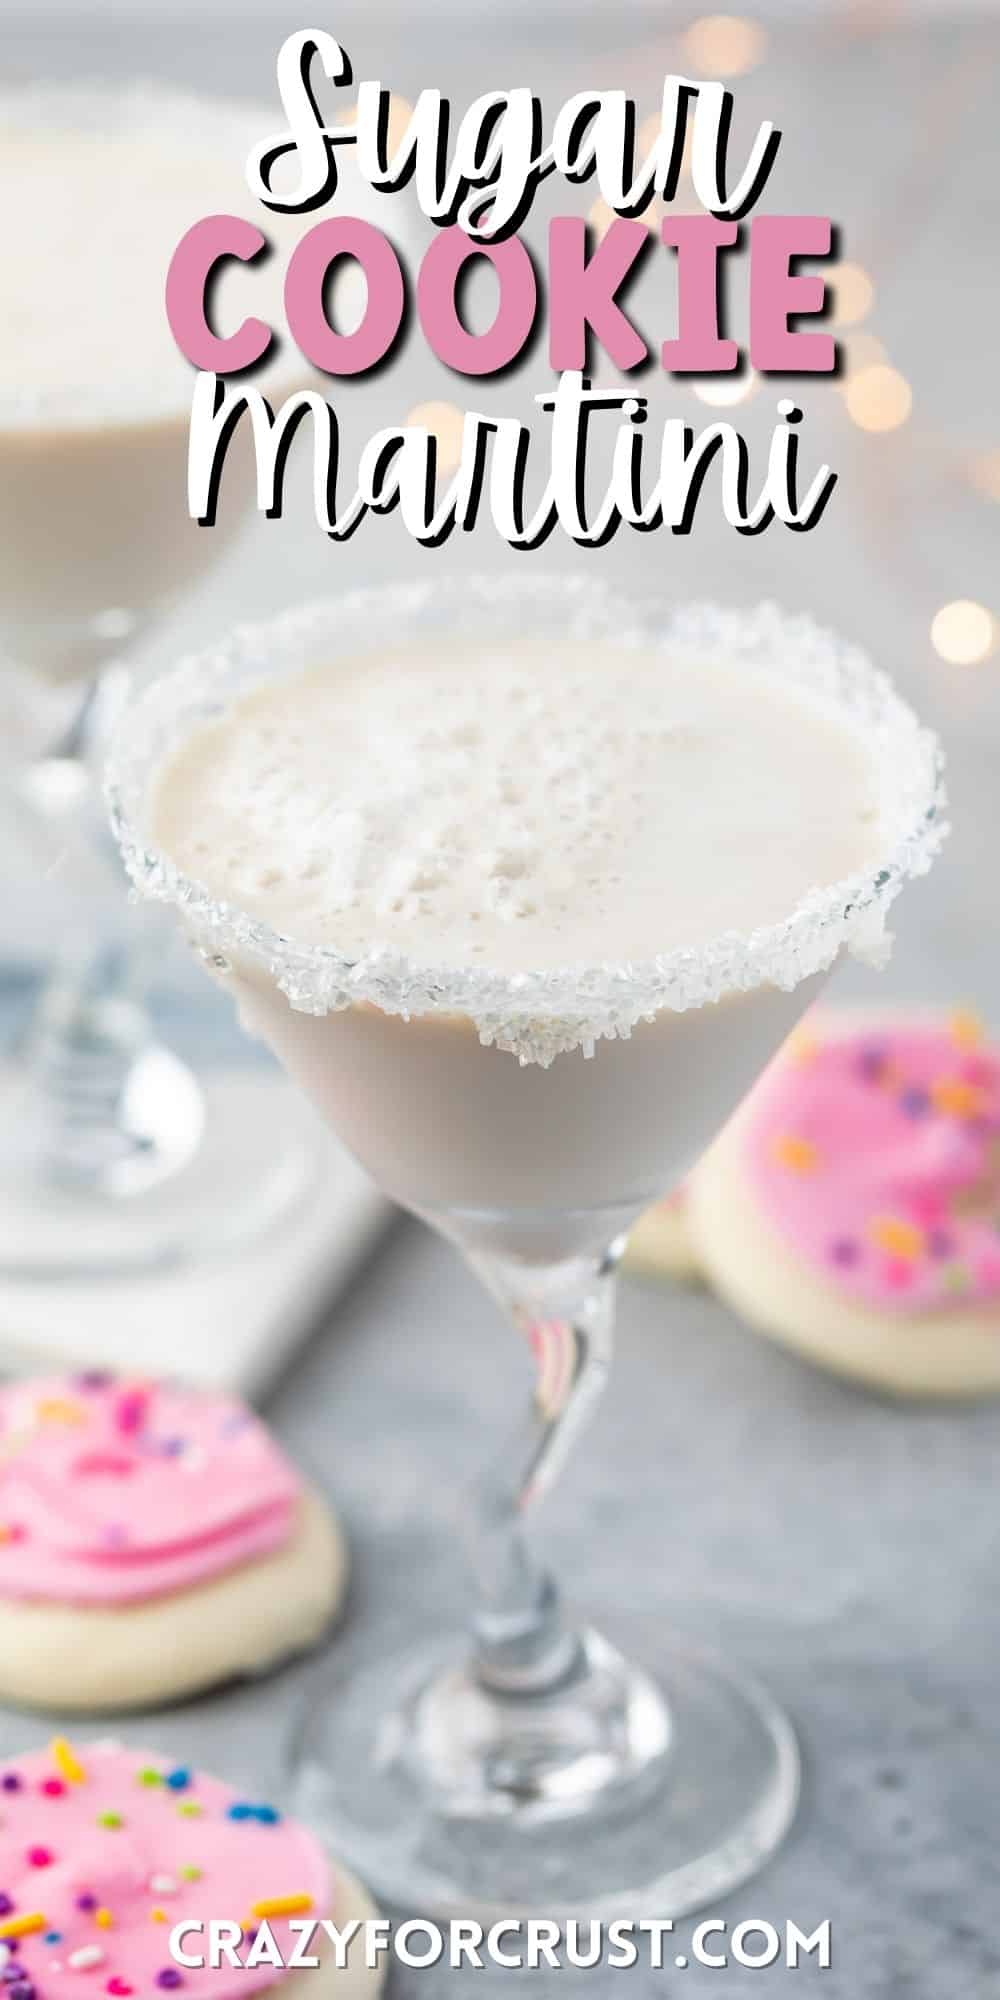 white drink in a a martini glass with sugar cookies around the base of the glass with words on top